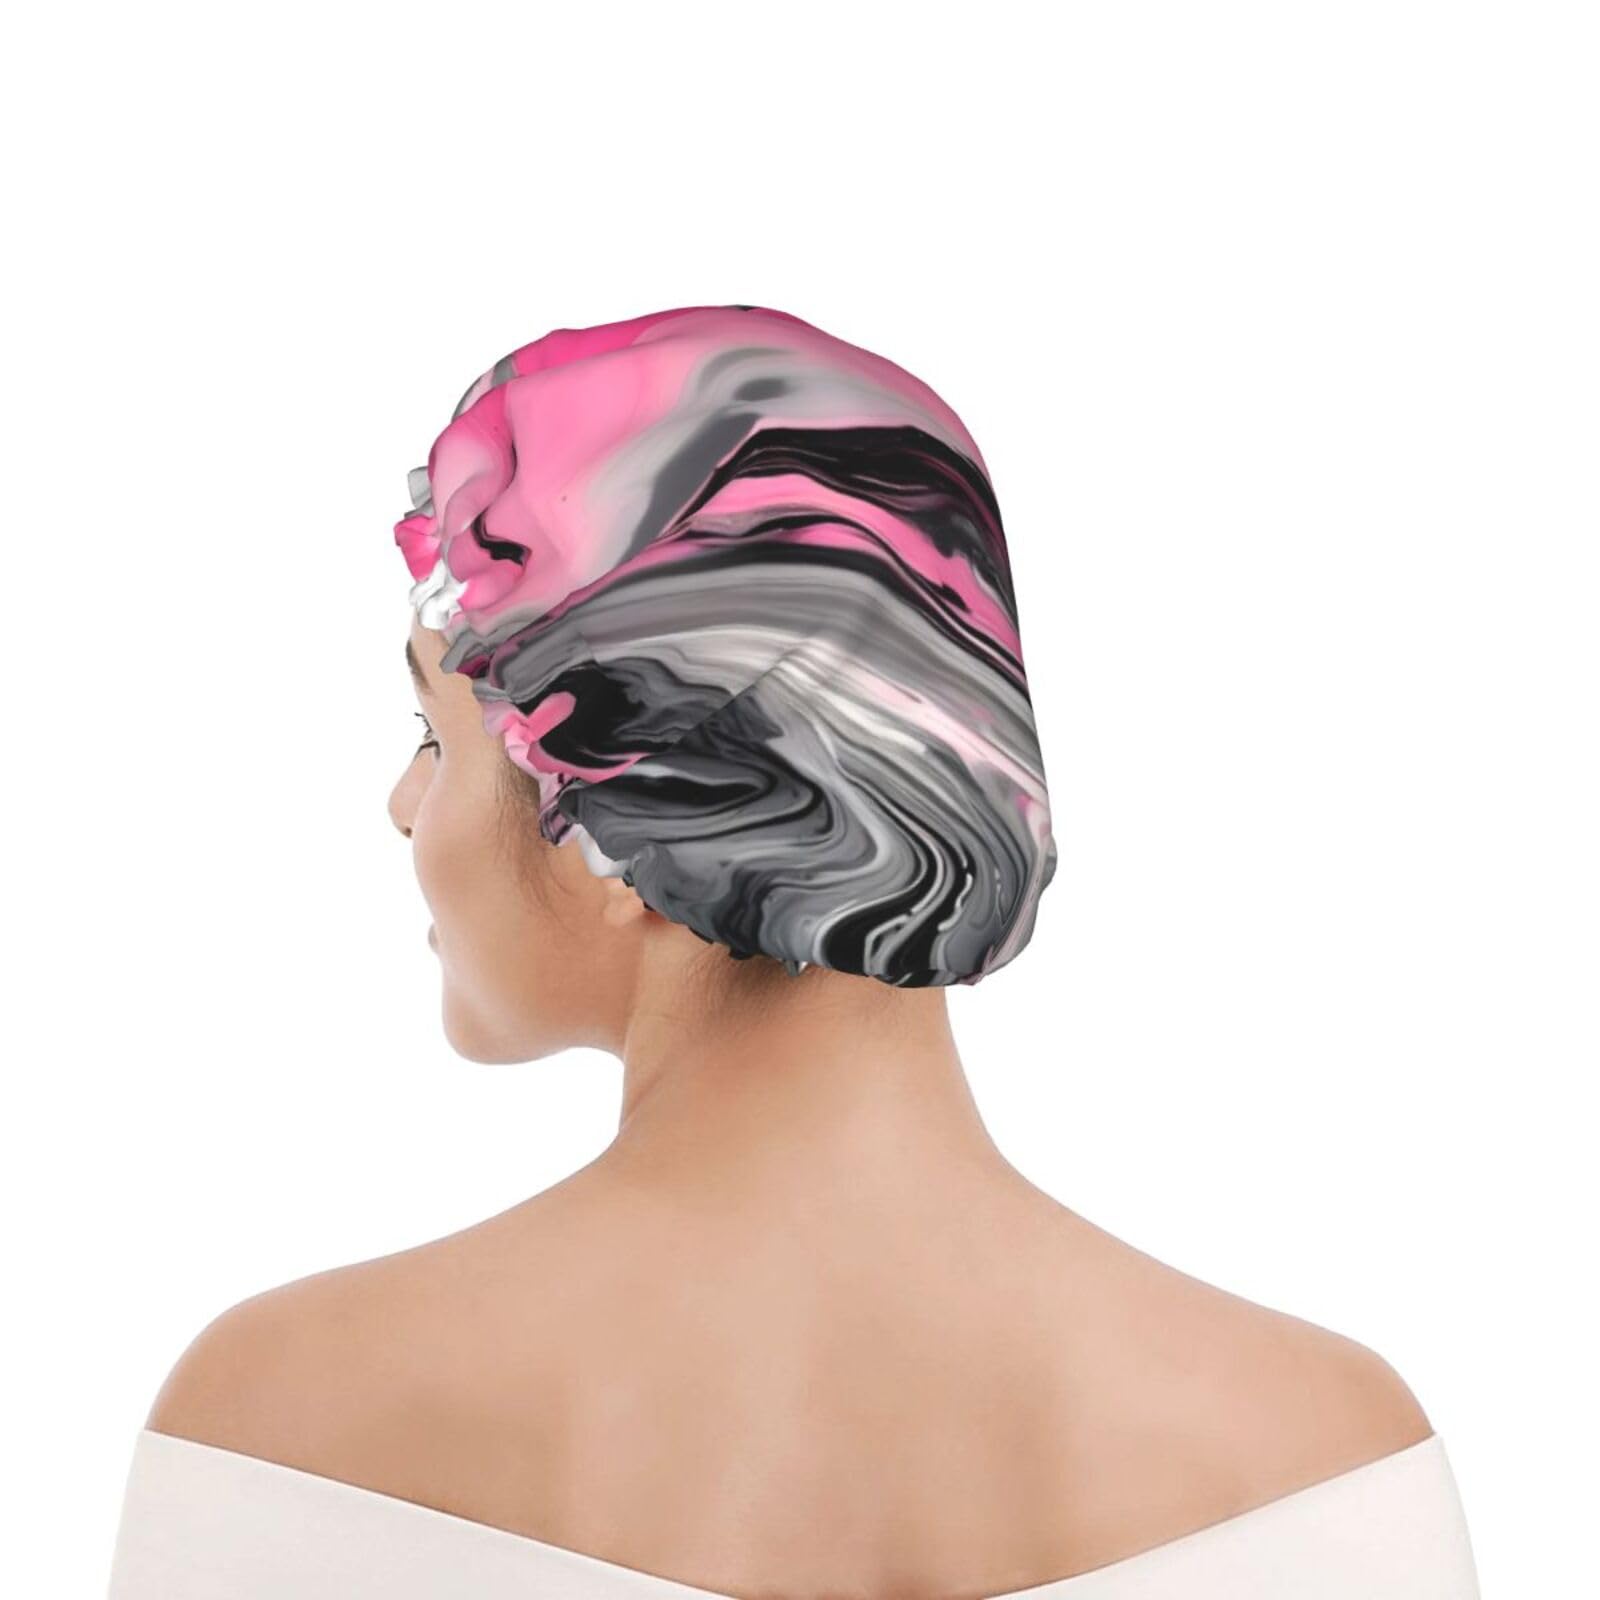 Pink Abstract Marble Gray Artistic Double Layer Waterproof Shower Cap - Women's Lightweight, Portable, Soft, Reusable Bath Accessory